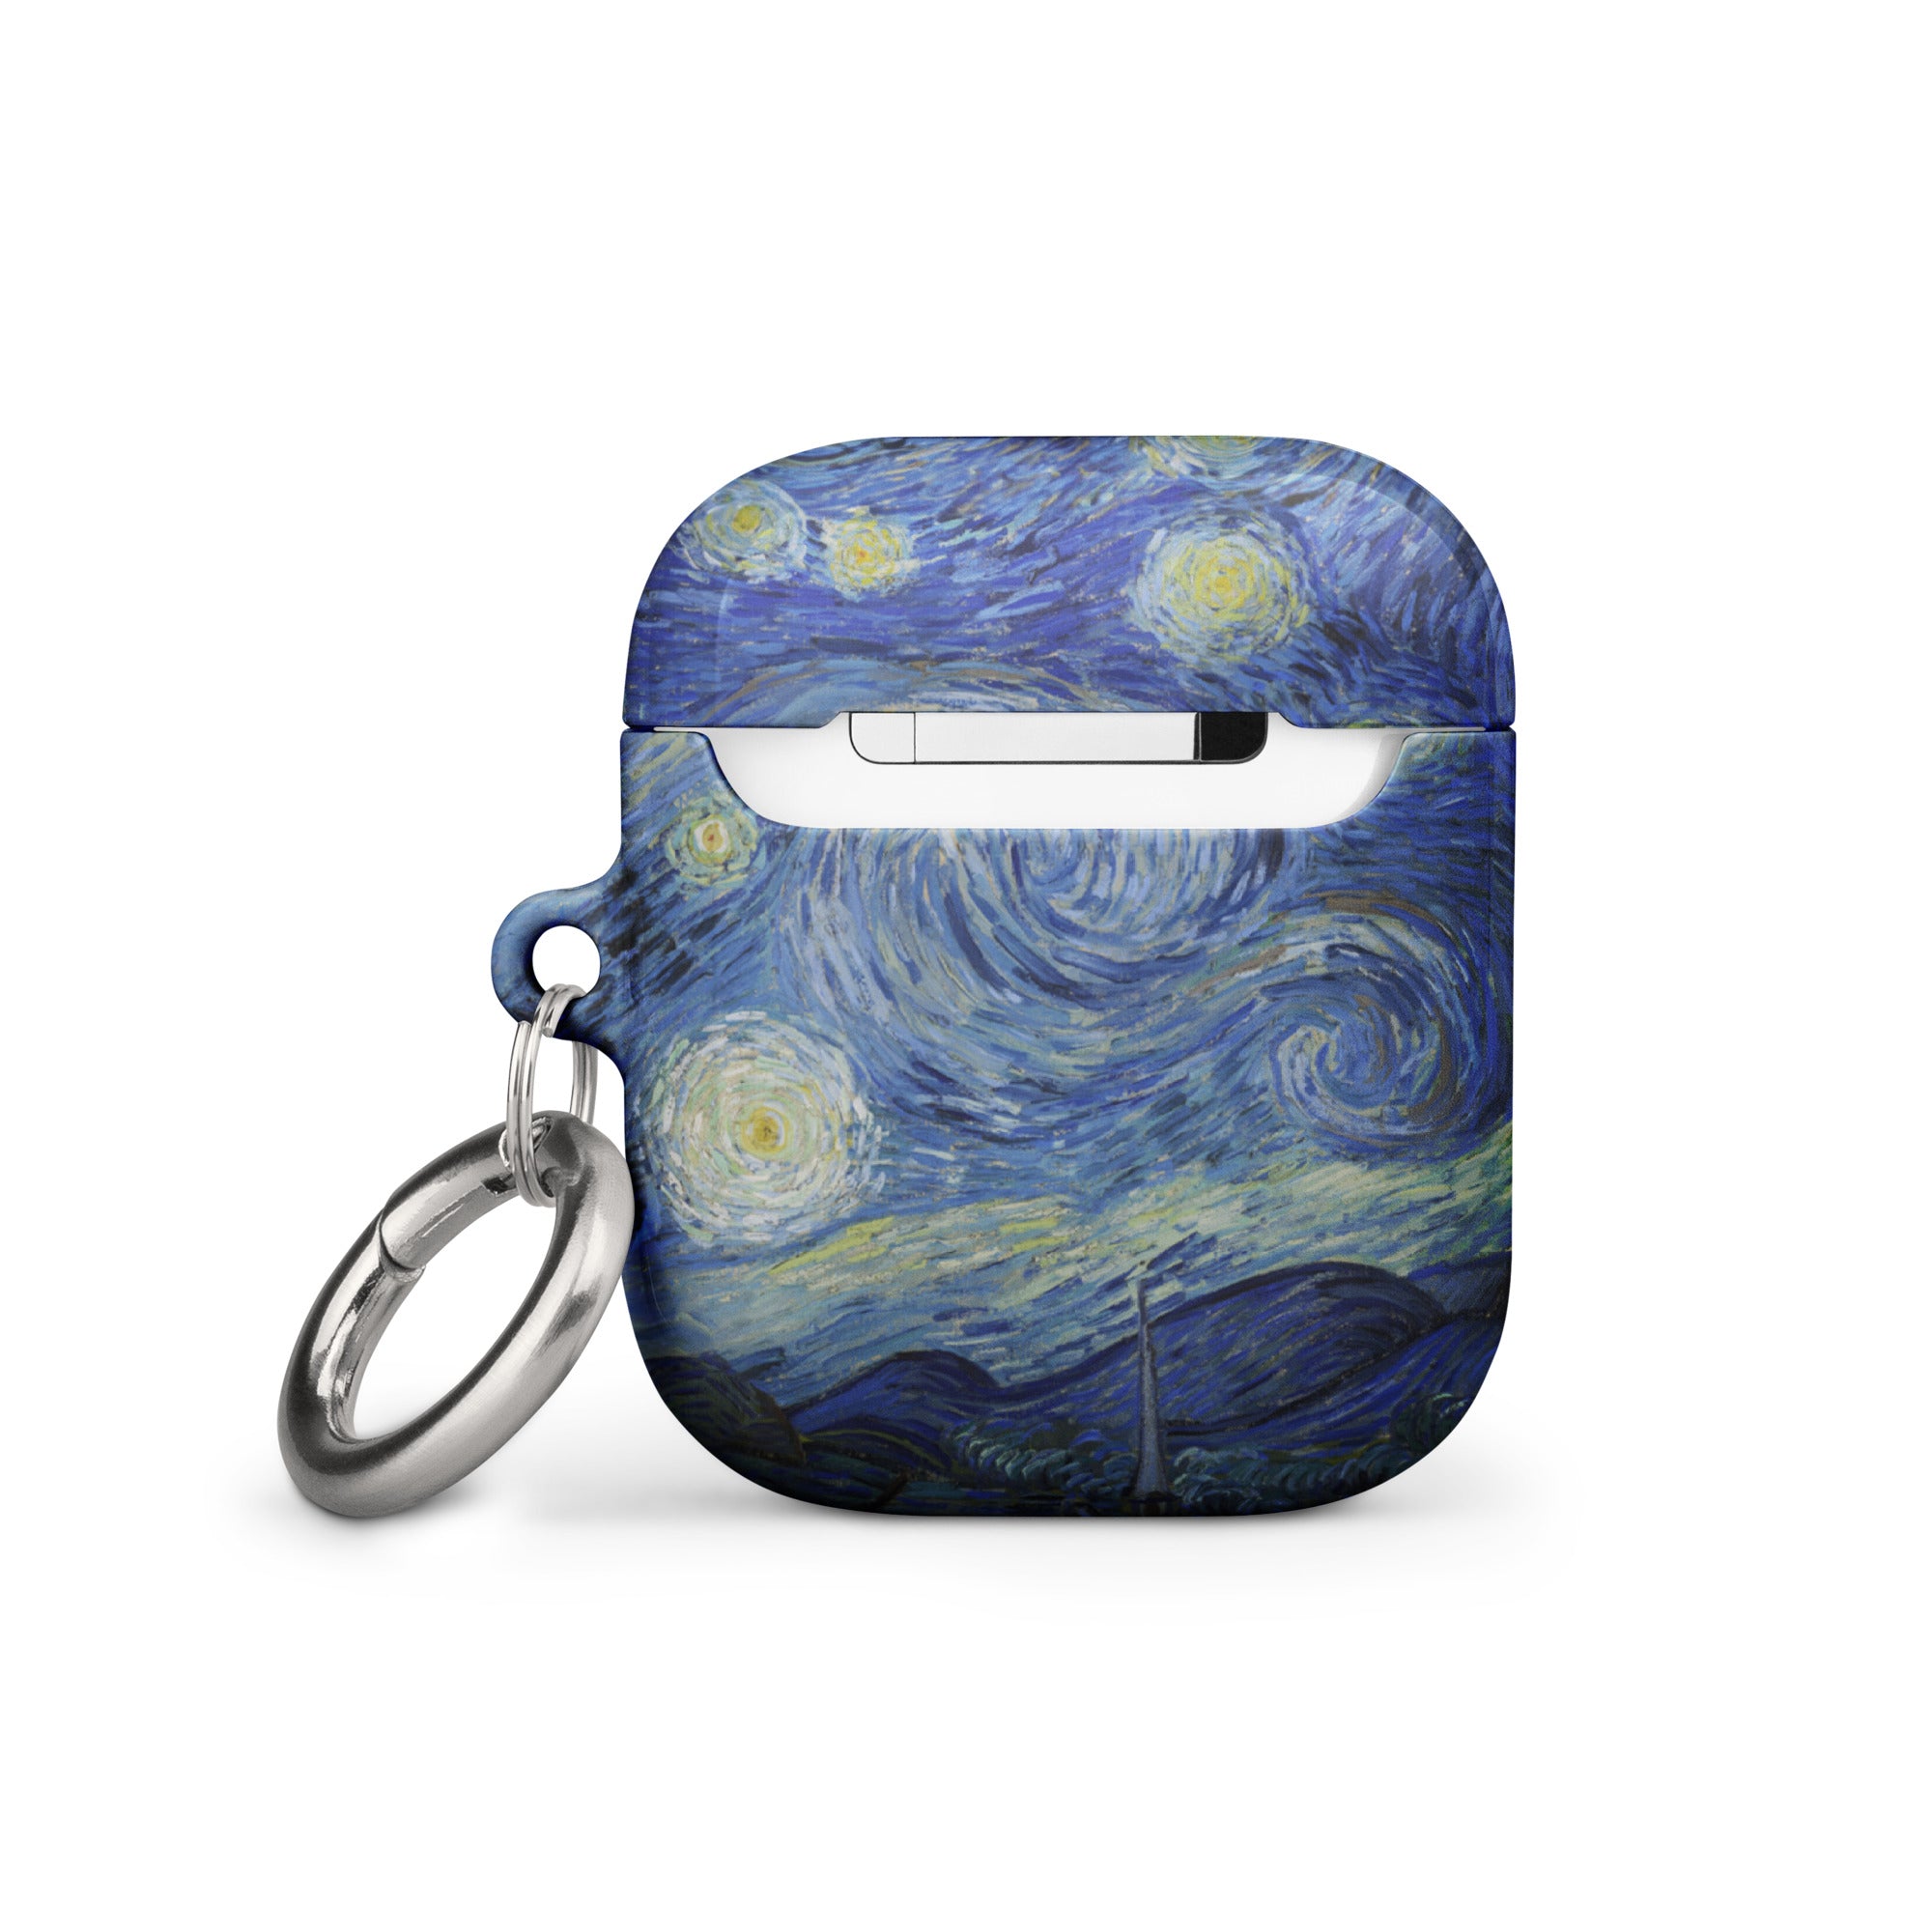 Vincent van Gogh 'Starry Night' Famous Painting AirPods® Case | Premium Art Case for AirPods®